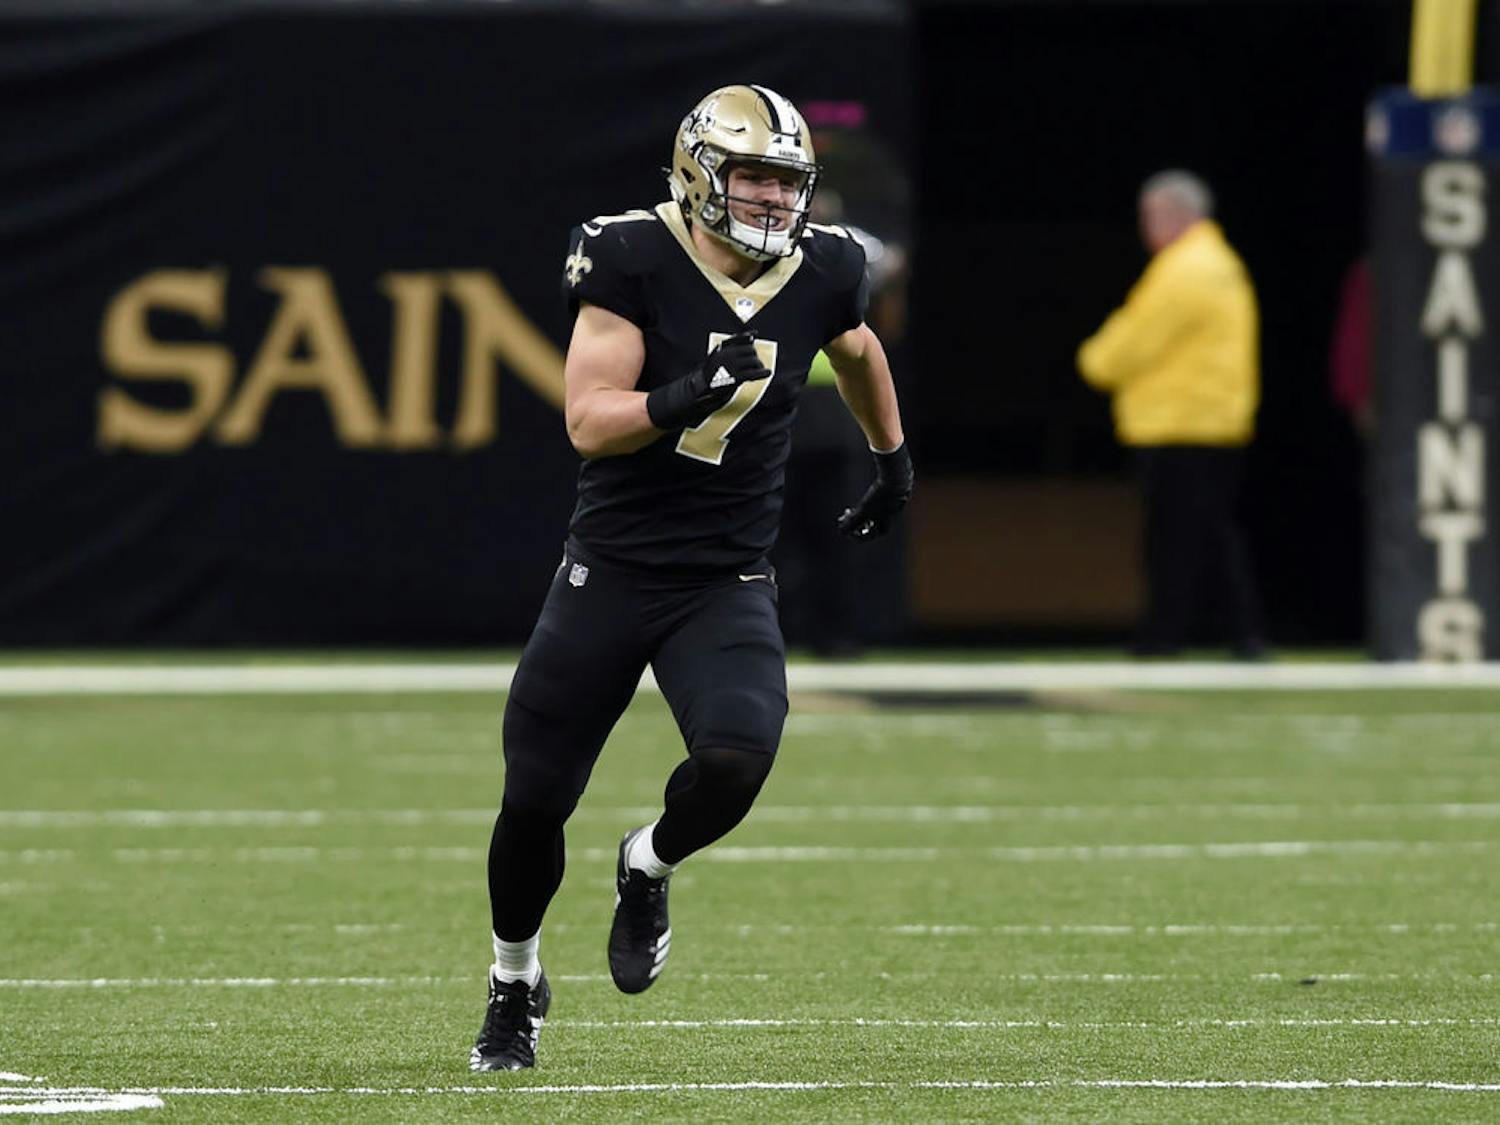 New Orleans Saints third-string quarterback Taysom Hill nearly blocked a punt in Sunday's divisional round playoff game, prompting praise from Fox broadcasters Joe Buck and Troy Aikman.